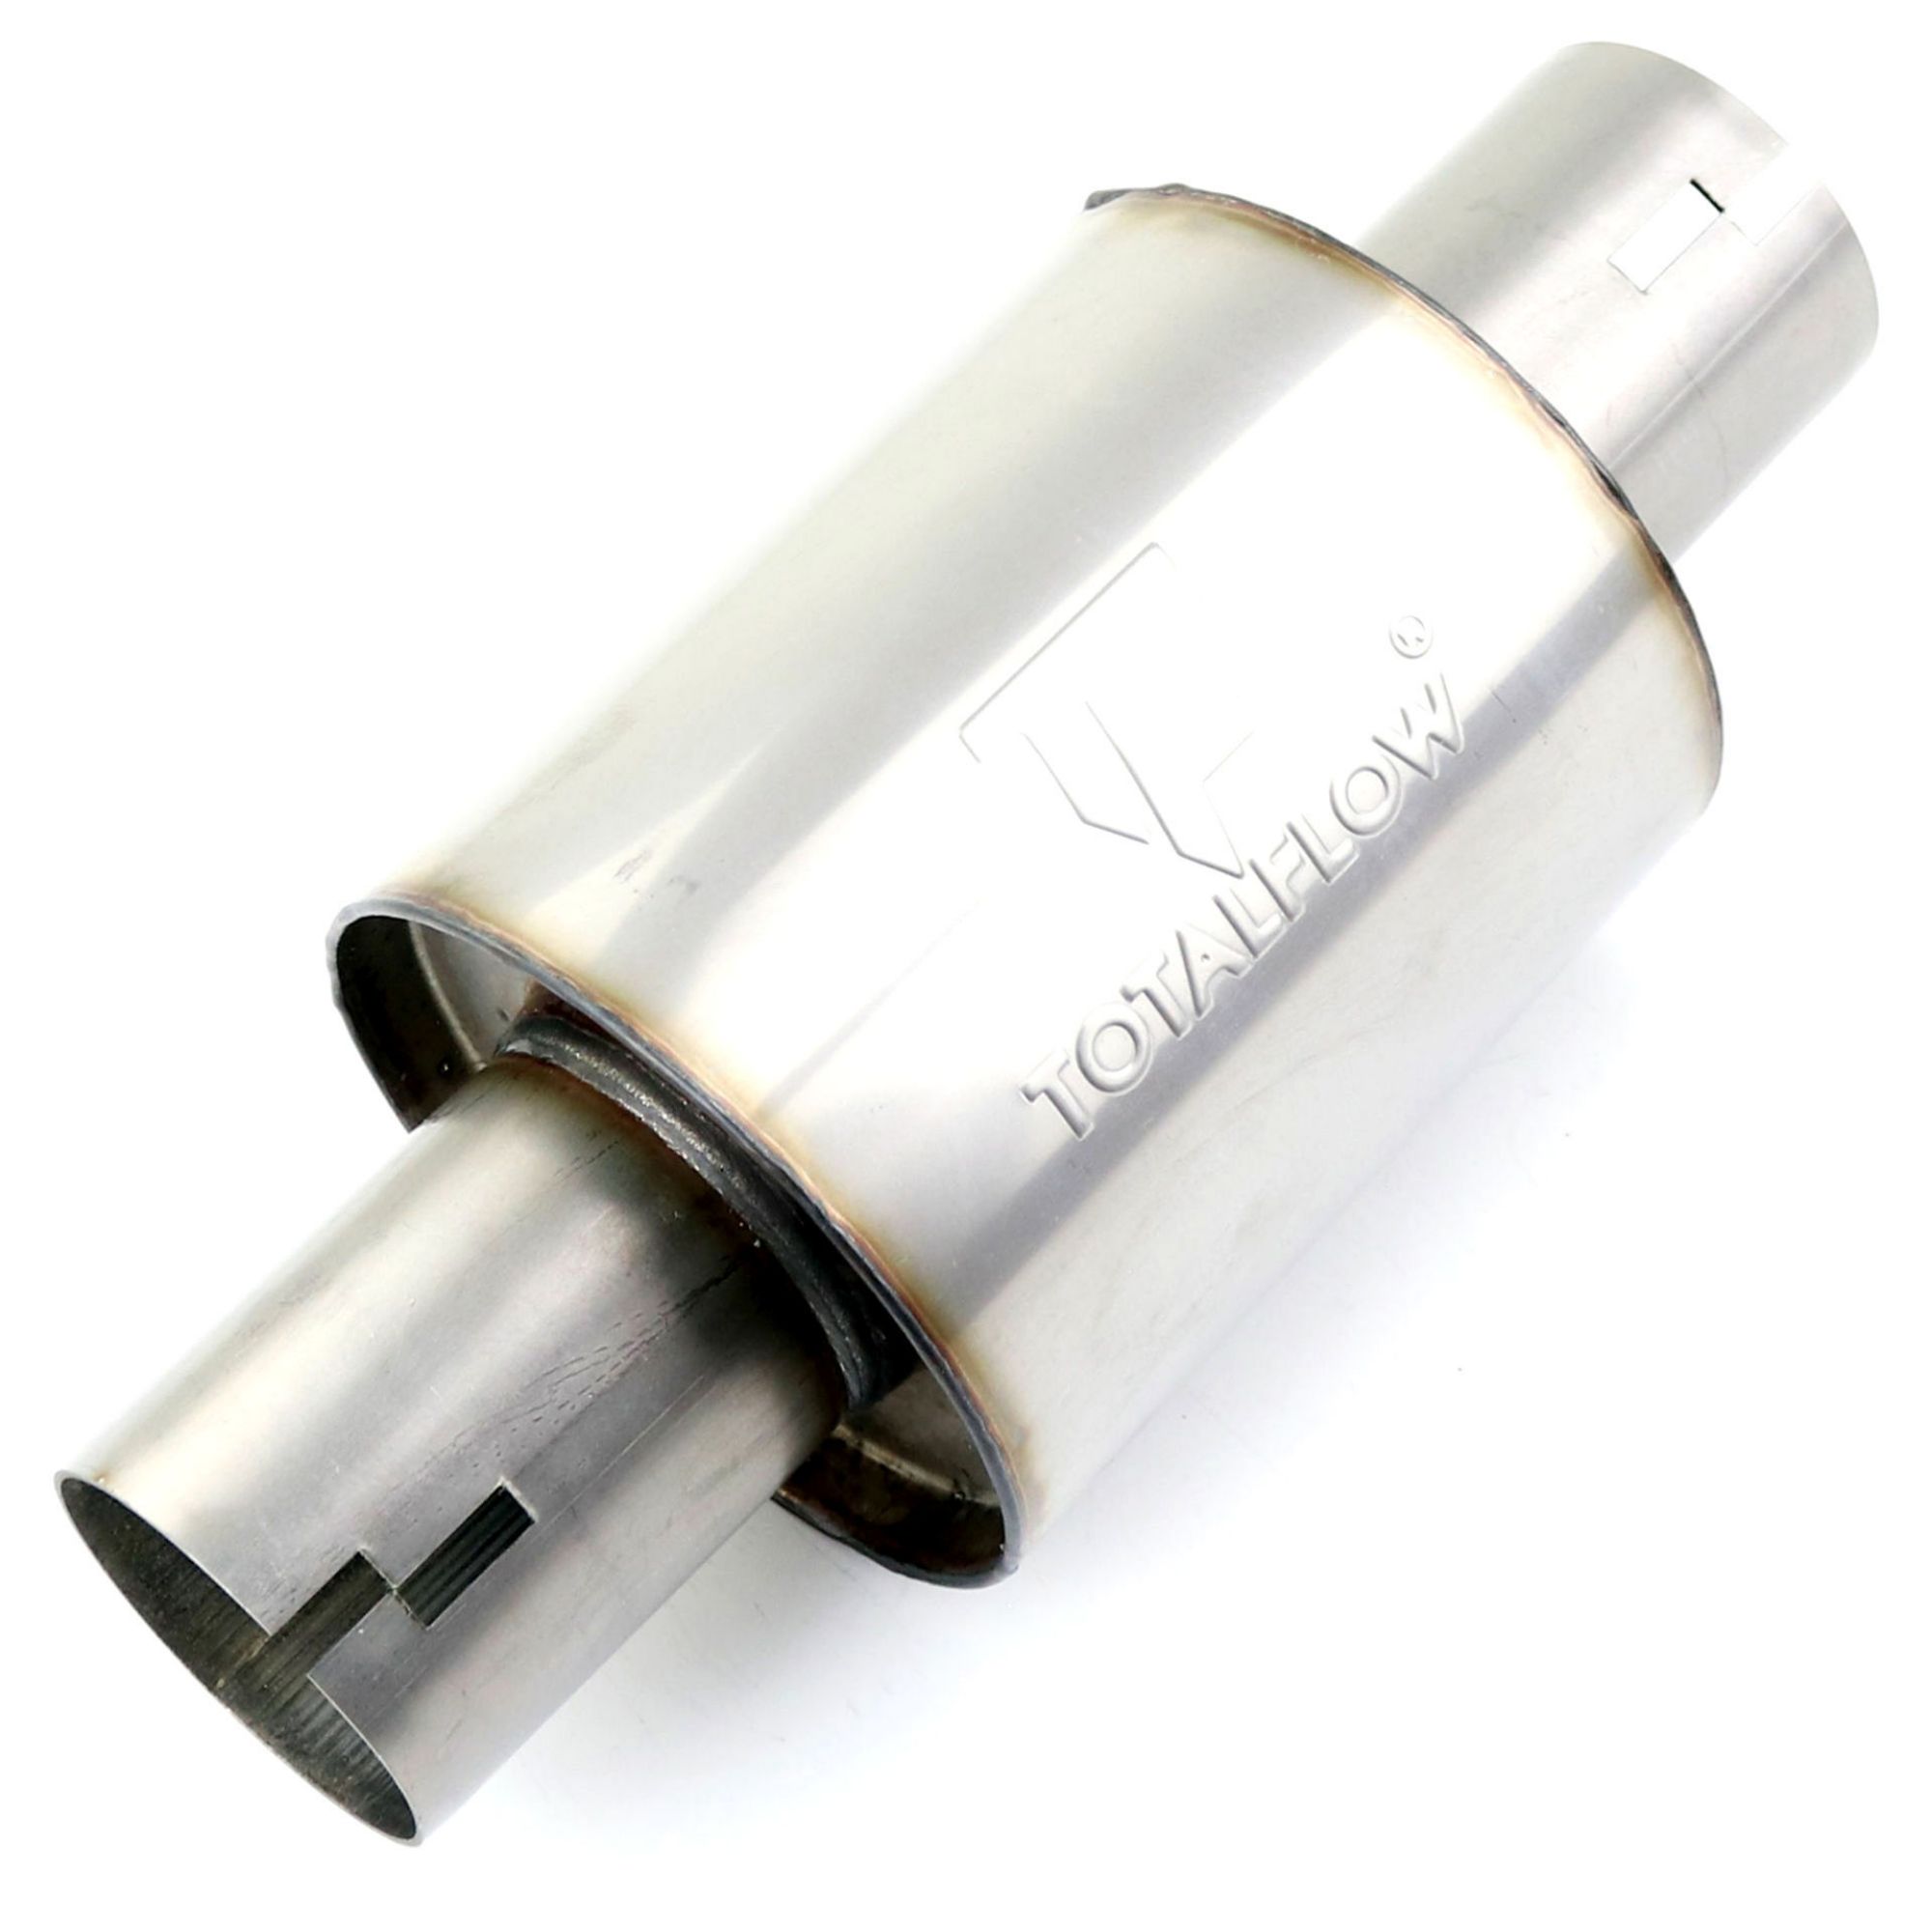 TOTALFLOW 22316N Straight Through Universal 2-1/2" Inch Notched Ends Exhaust Muffler - 2.5 Inch ID